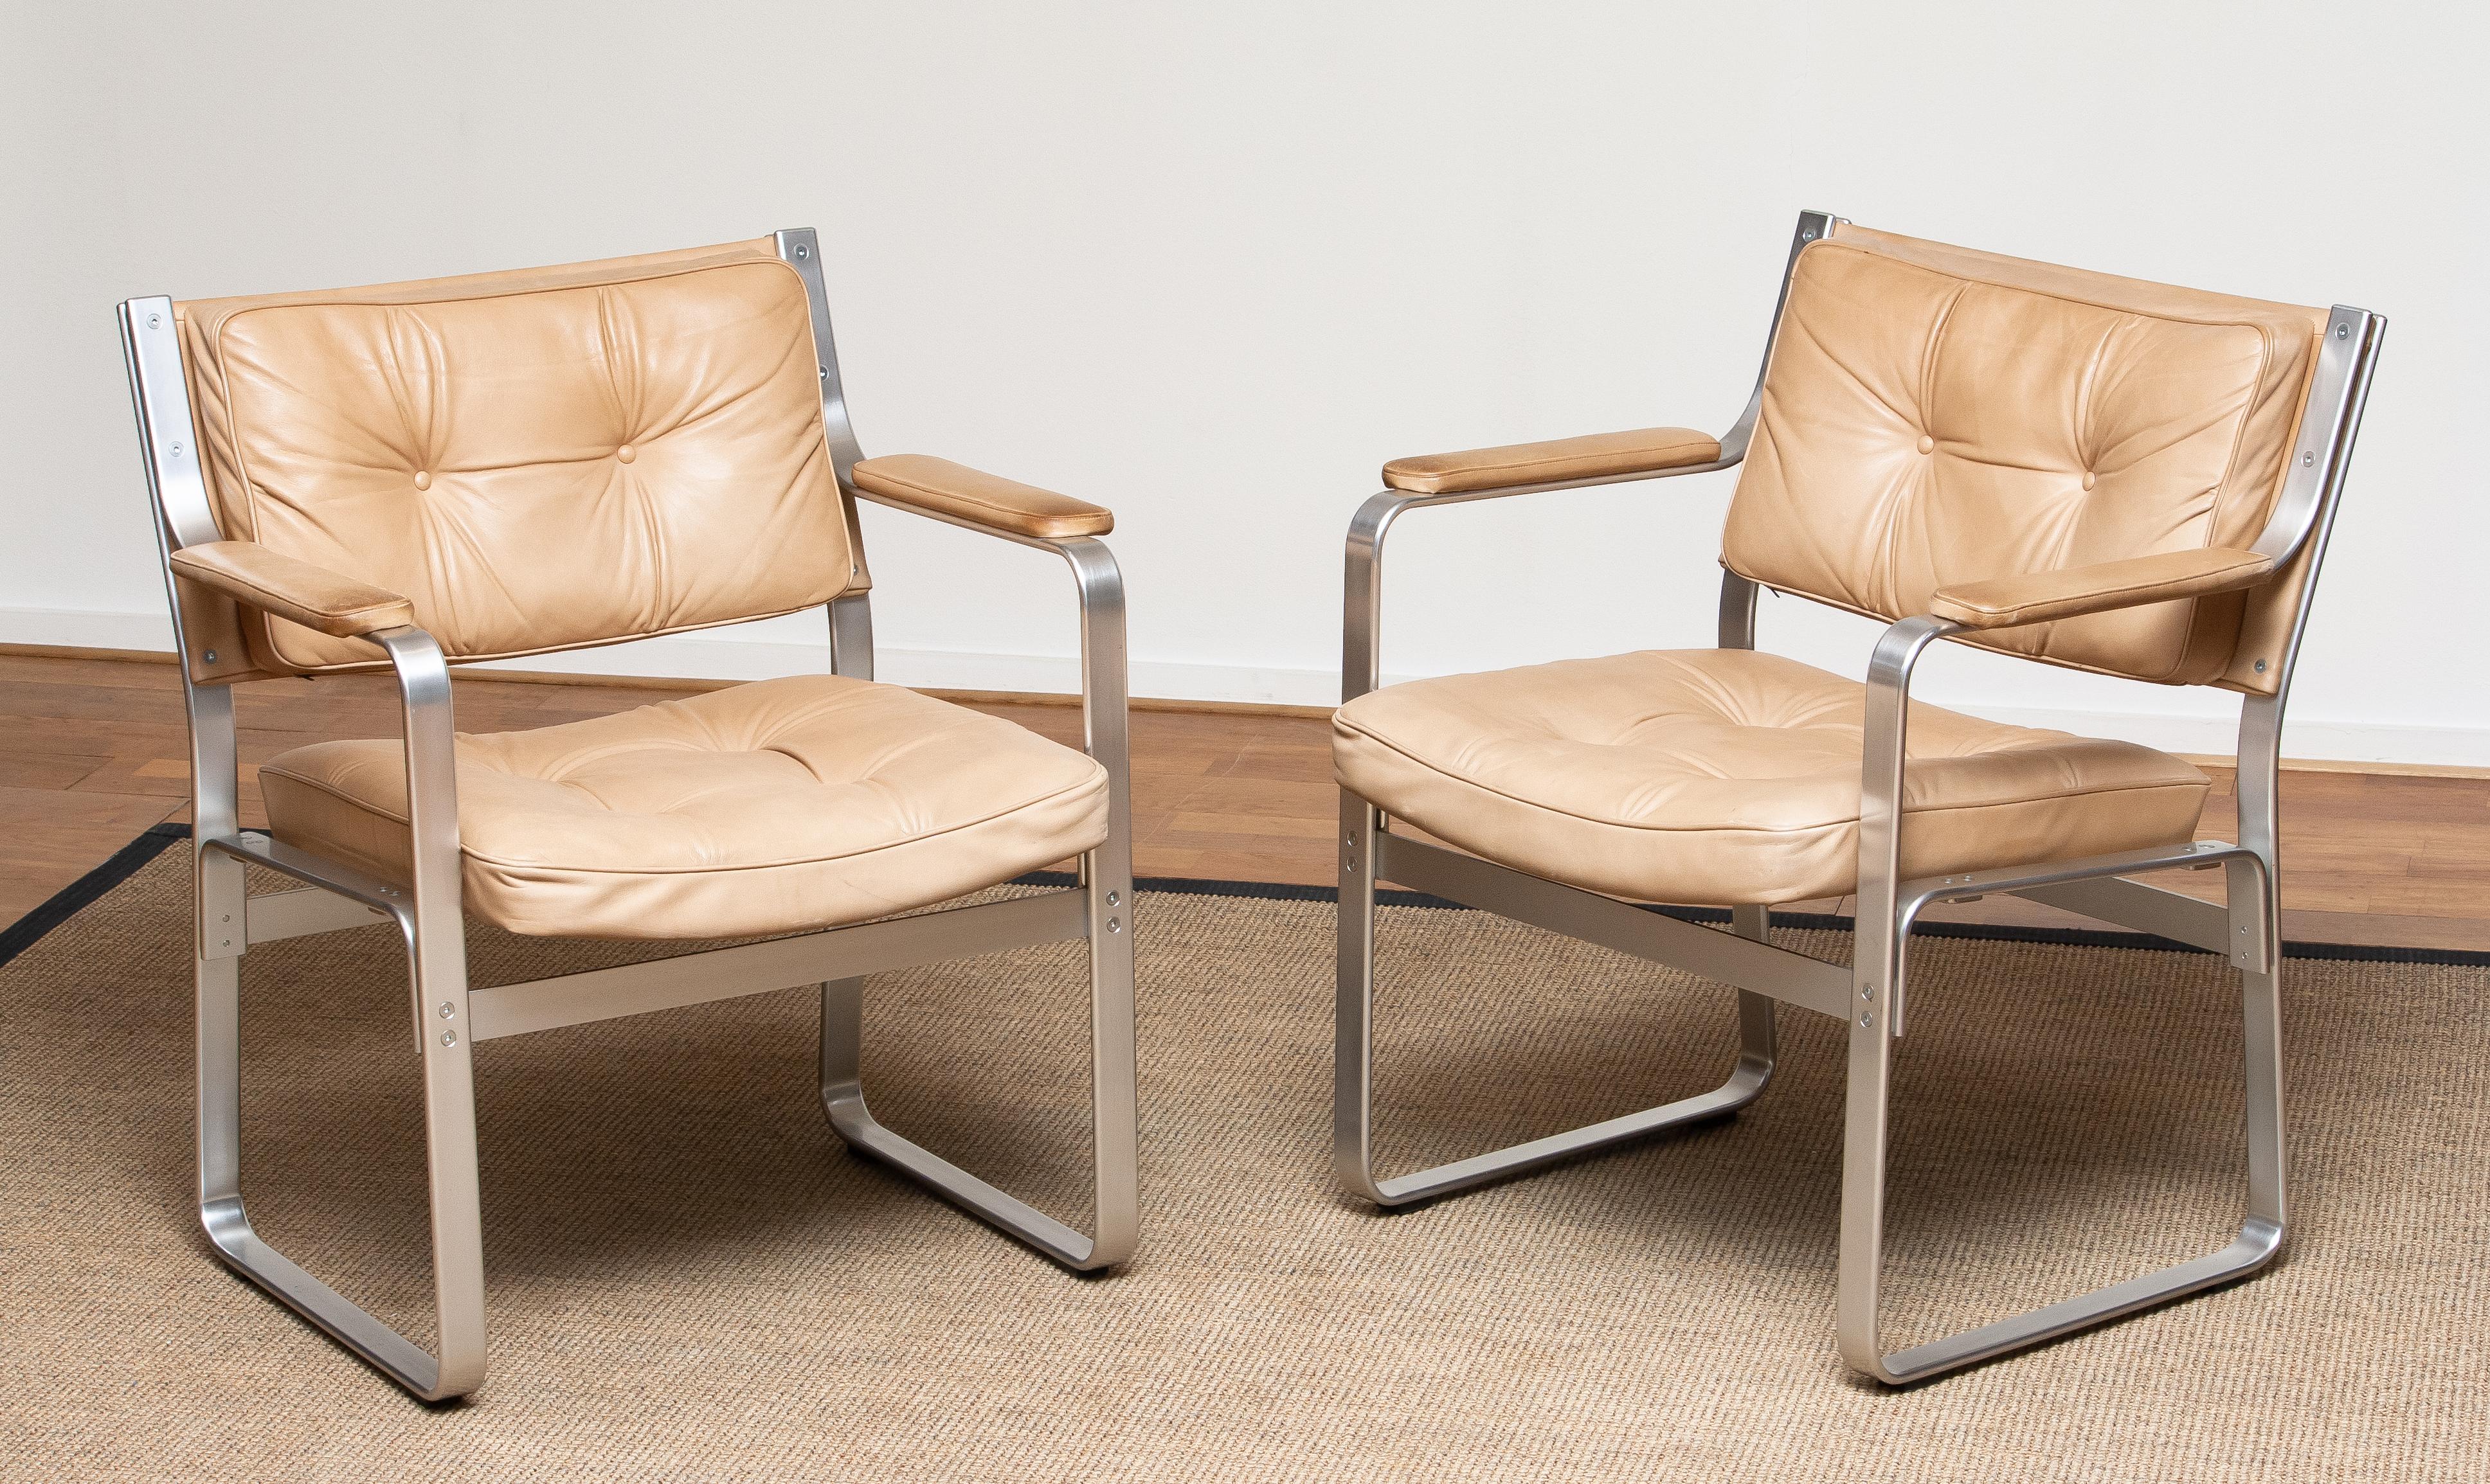 1960's set of two 'Mondo' armchairs in aluminum with beige / taupe leather upholstery designed by Karl Erik Ekselius for J.O. Carlsson / JOC design in Sweden.
Both chairs are in perfect condition and completely original. The fillings in de seats